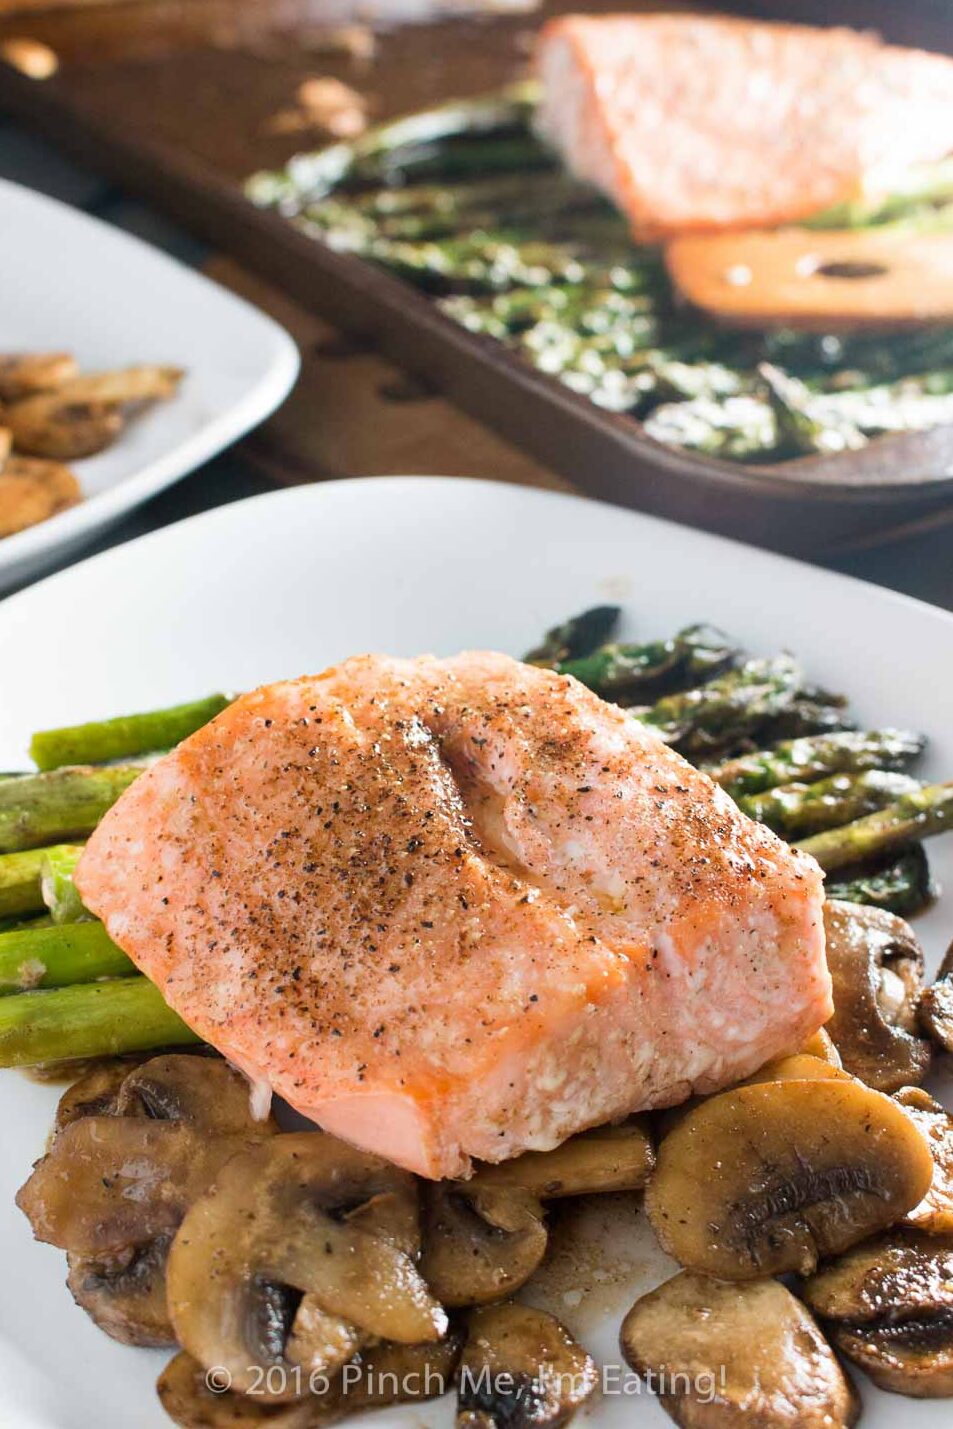 One-pan Salmon with Asparagus, Mushrooms, and Balsamic Brown Butter Sauce